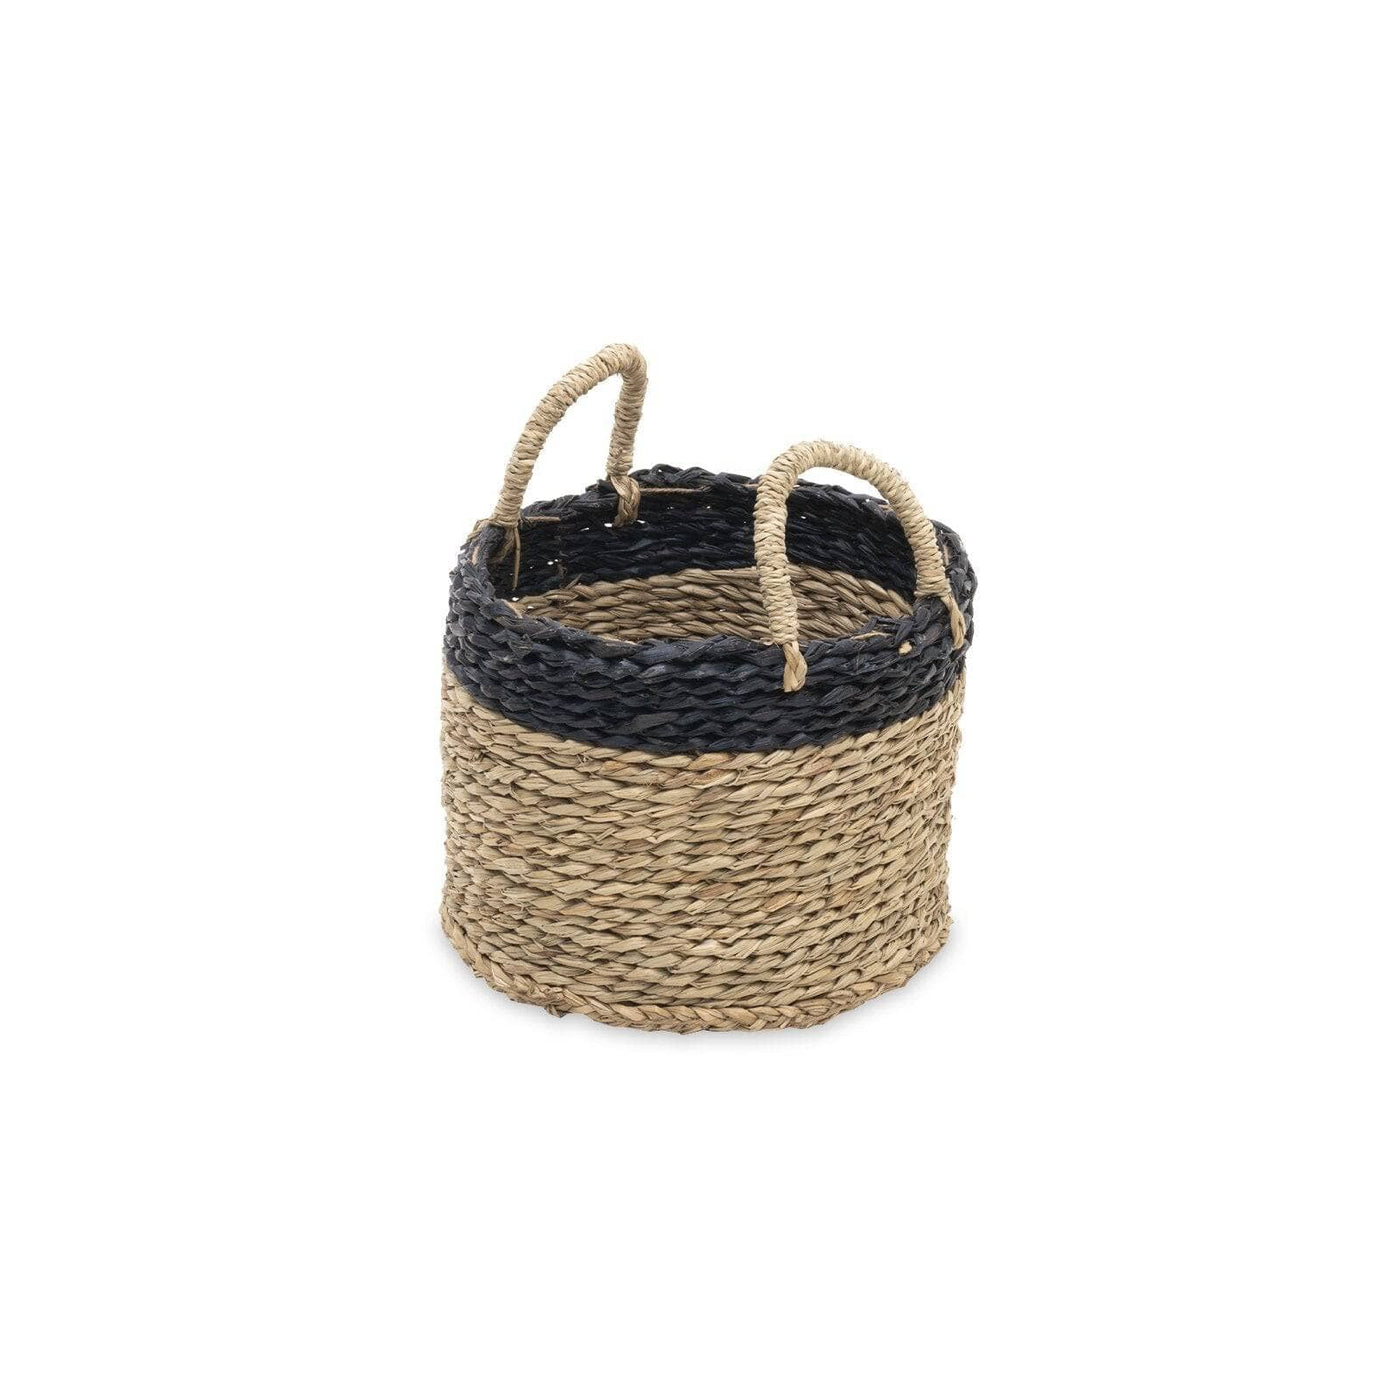 Norman Seagrass Basket, Natural, M - 1